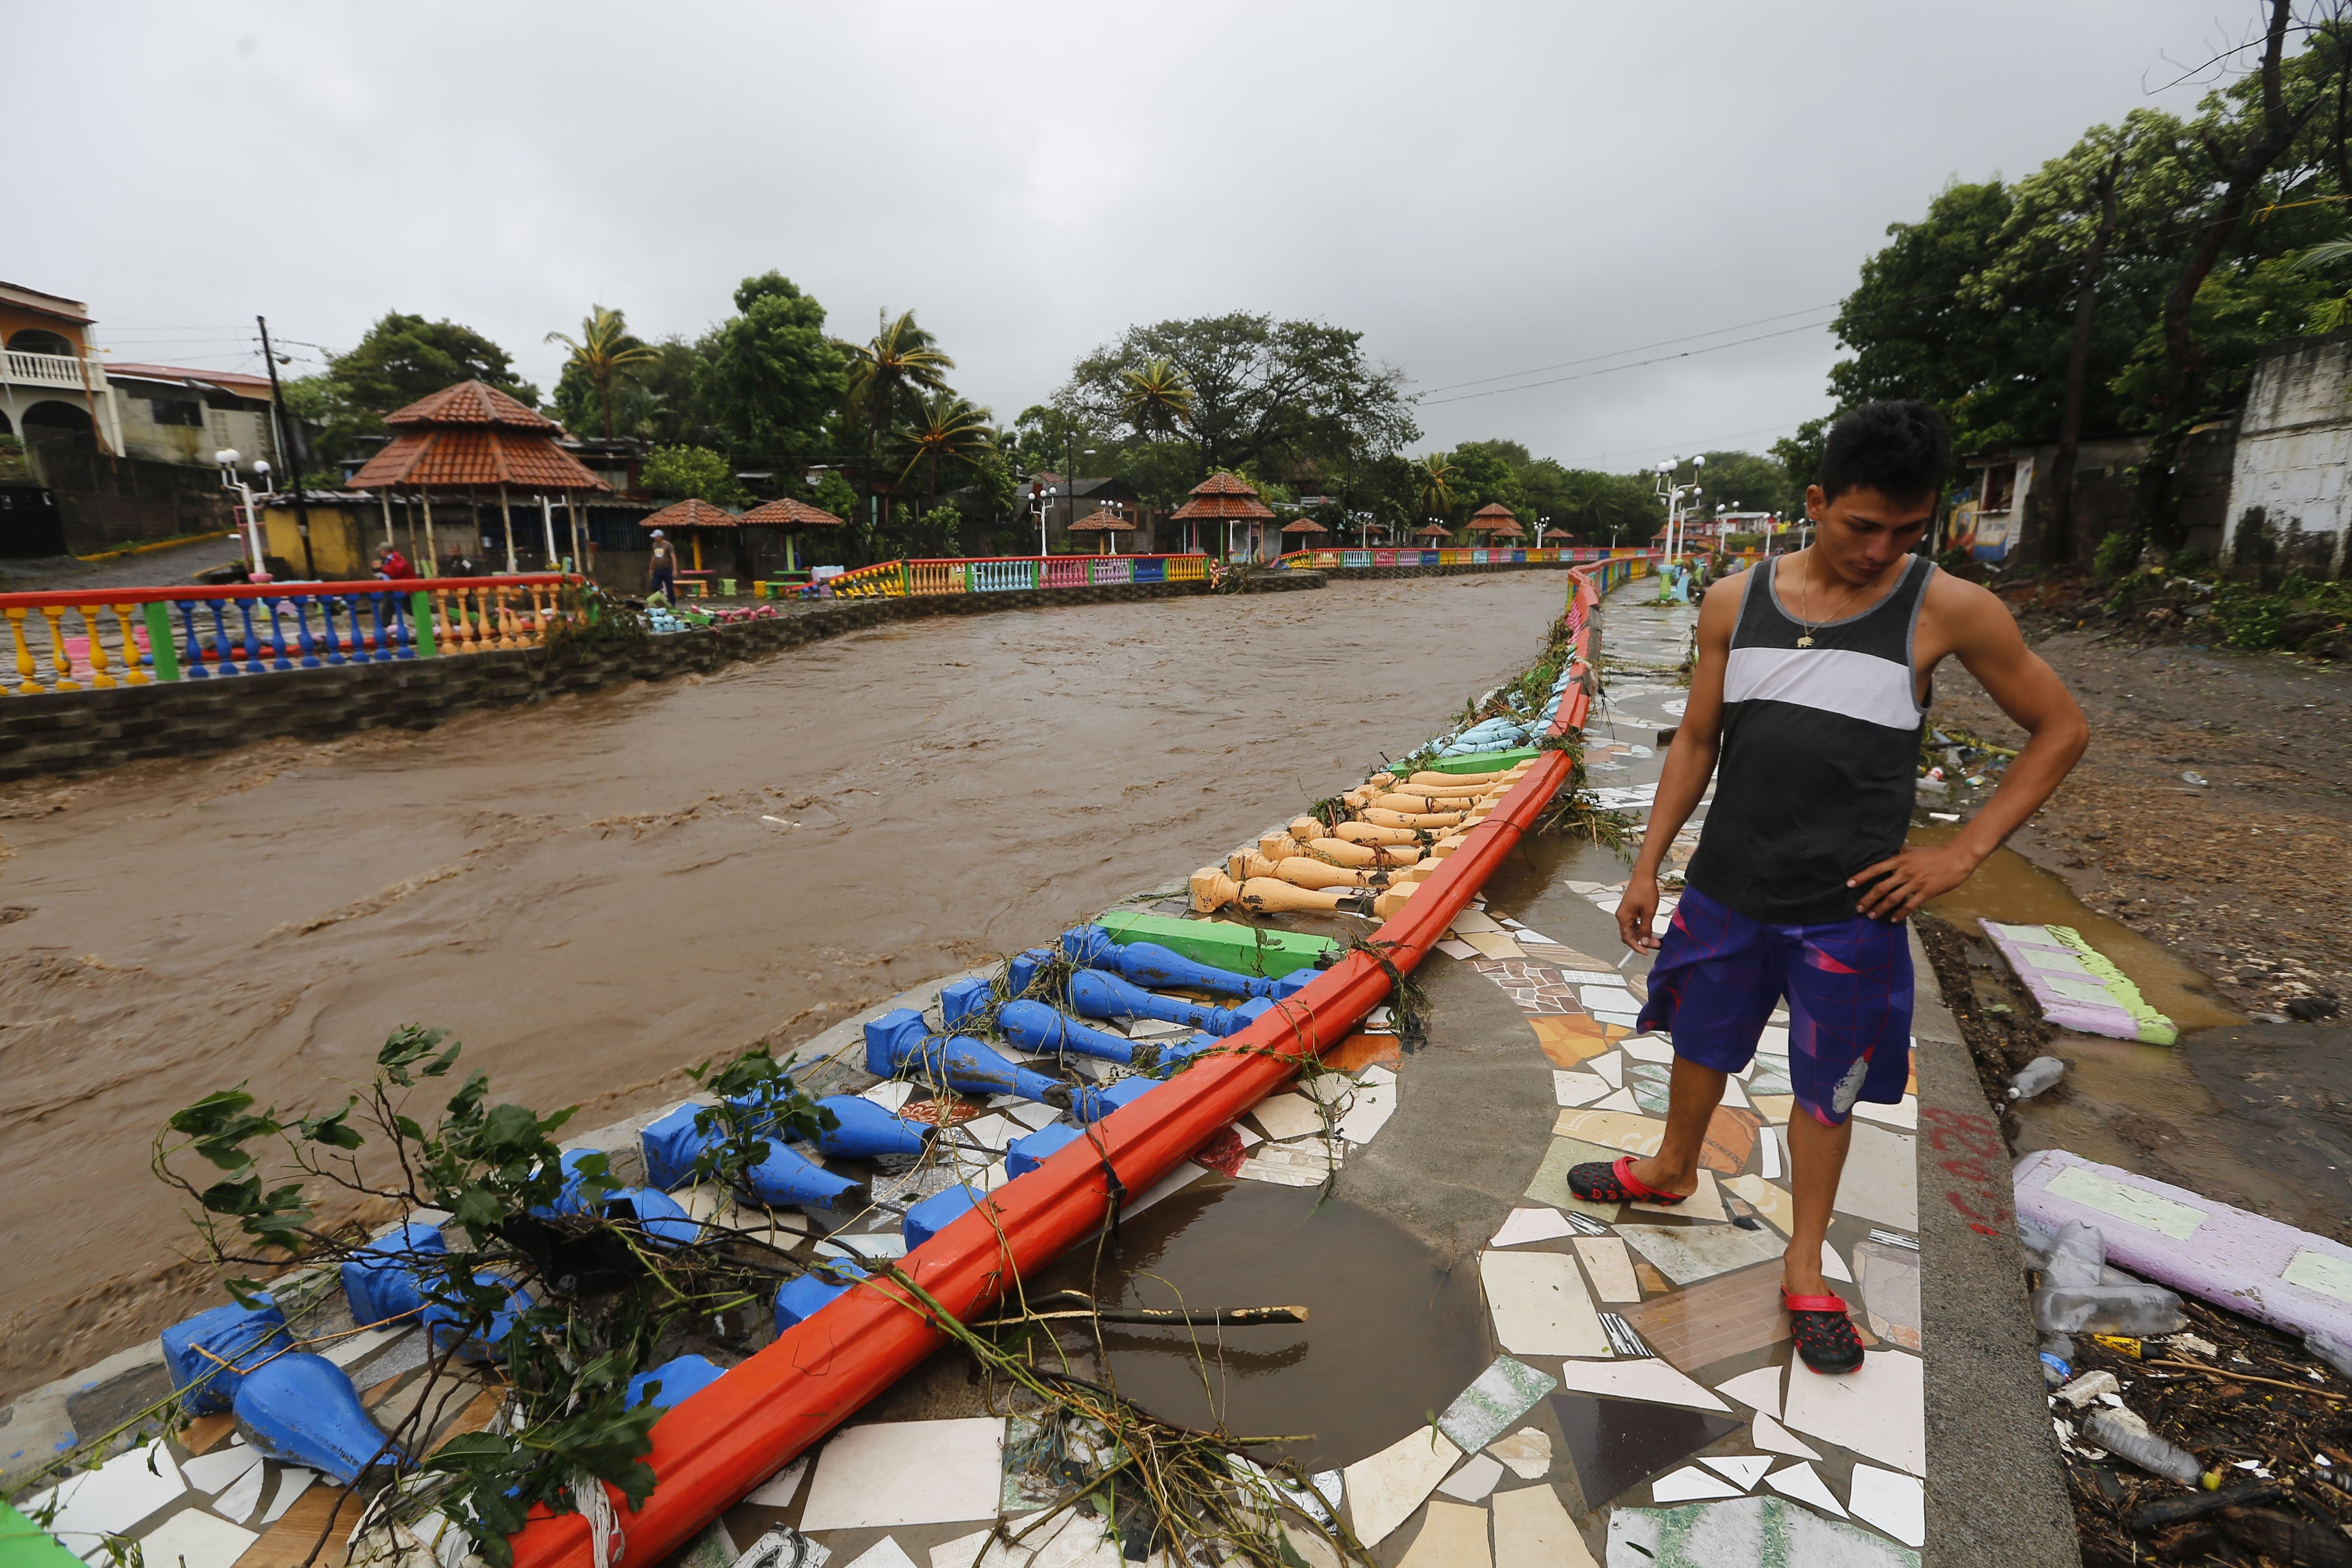 A resident looks at damages caused by the overflowing of the Masachapa River following the passage of Tropical Storm Nate in the city of Masachapa, Nicaragua on October 5, 2017. (INTI OCON—AFP/Getty Images)